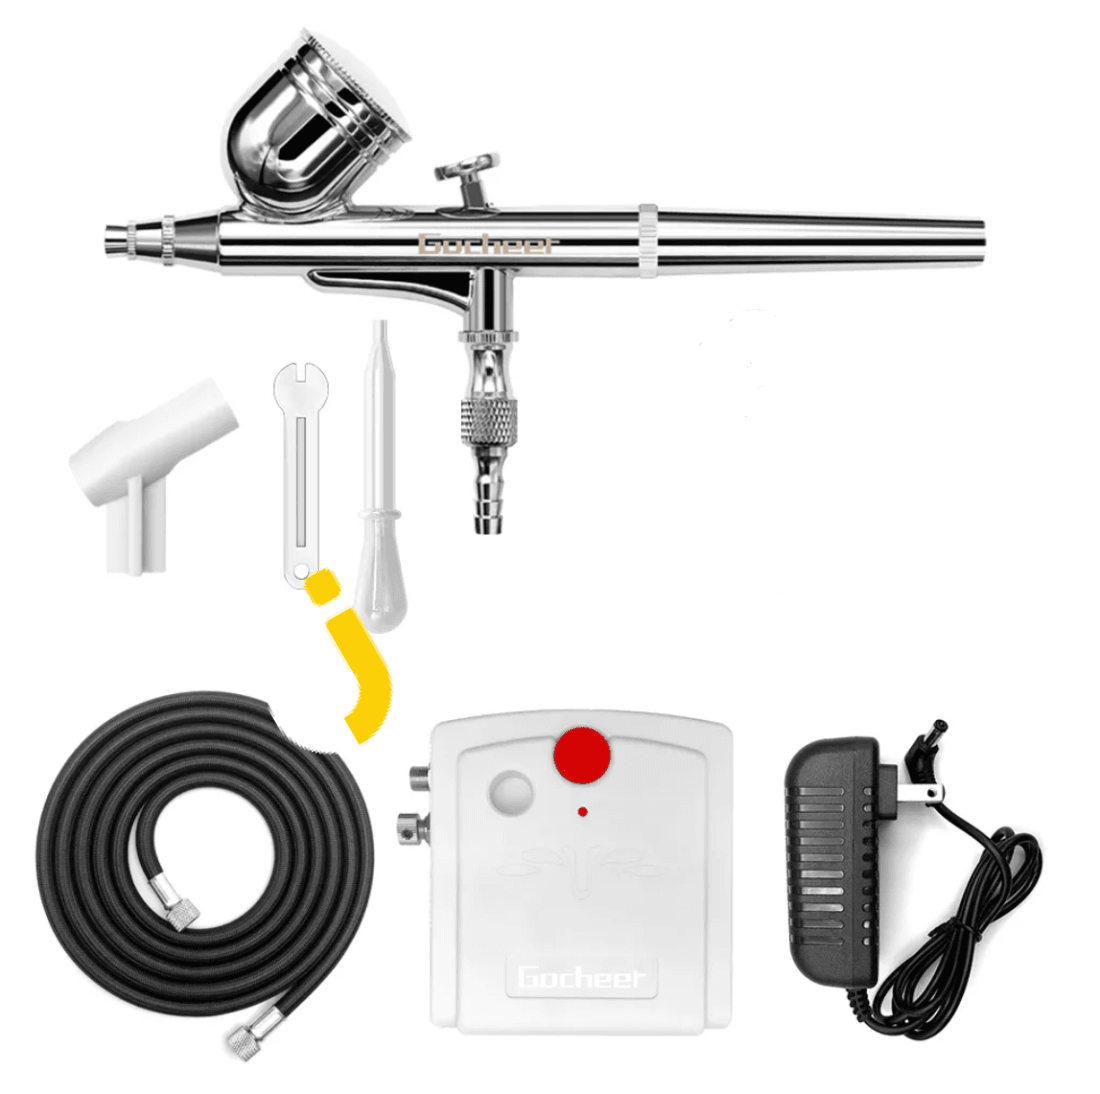 Gocheer Tc-100 Dual Action Airbrush With Compressor For Art Painting Tattoo Manicure Craft Cakes &